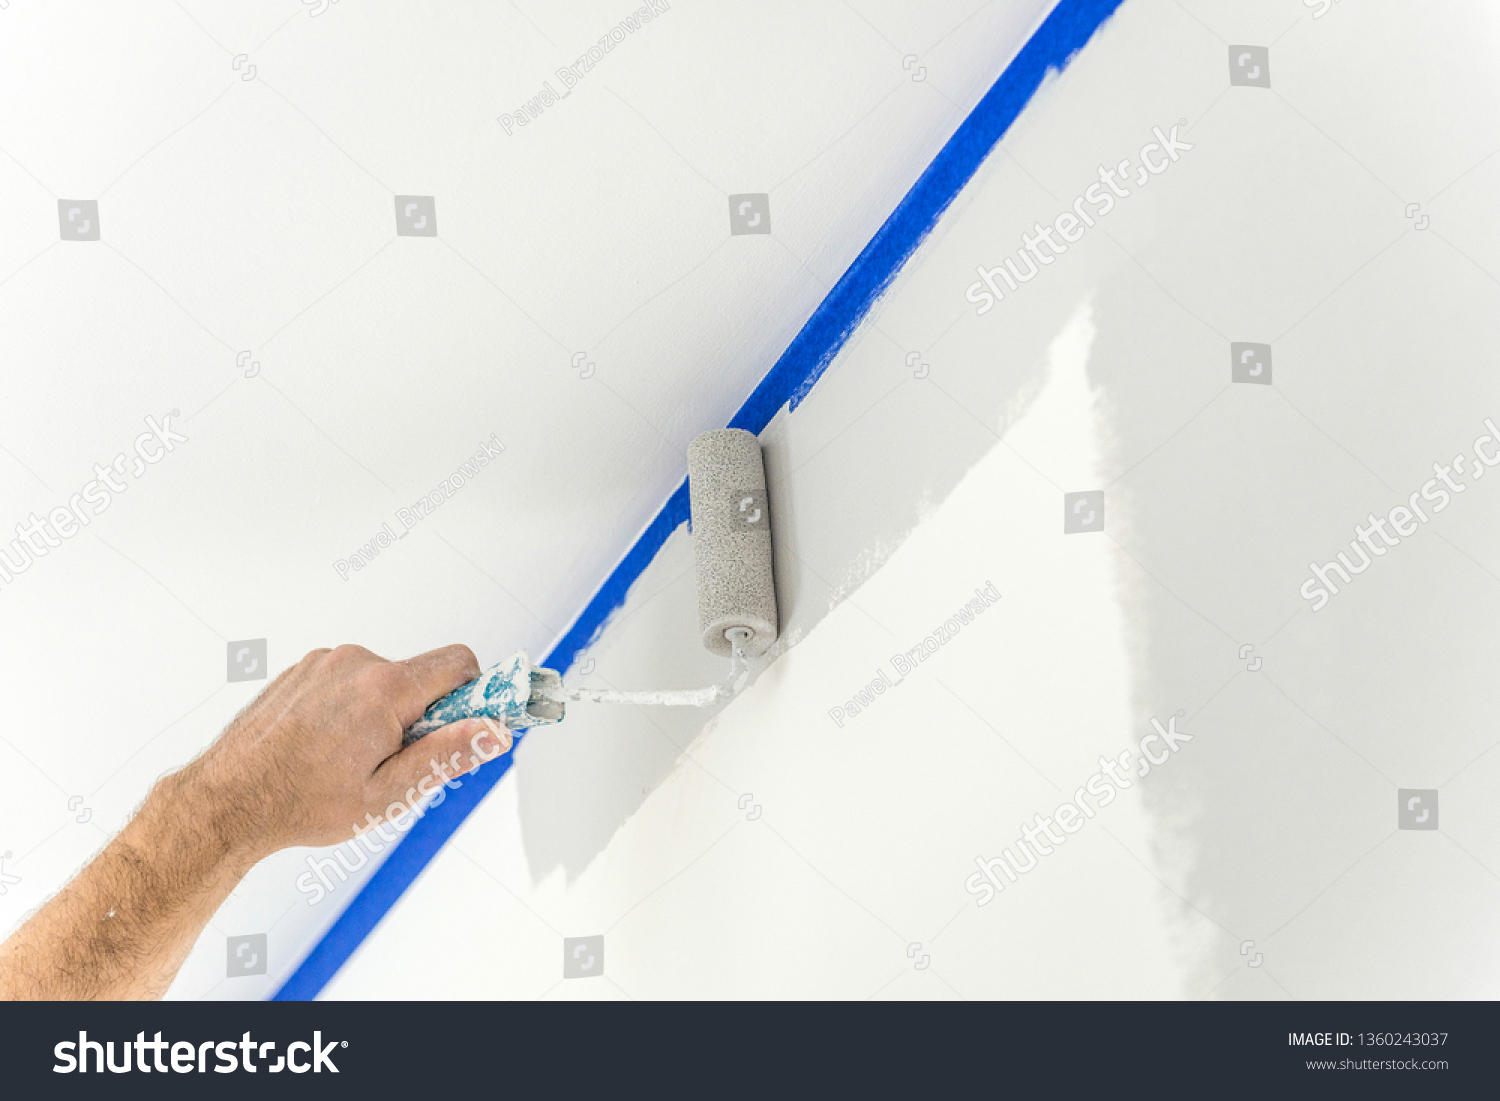 Stock Photo Hand Painting Wall With Roll In Grey Color Using Blue Paint Tape 1360243037 